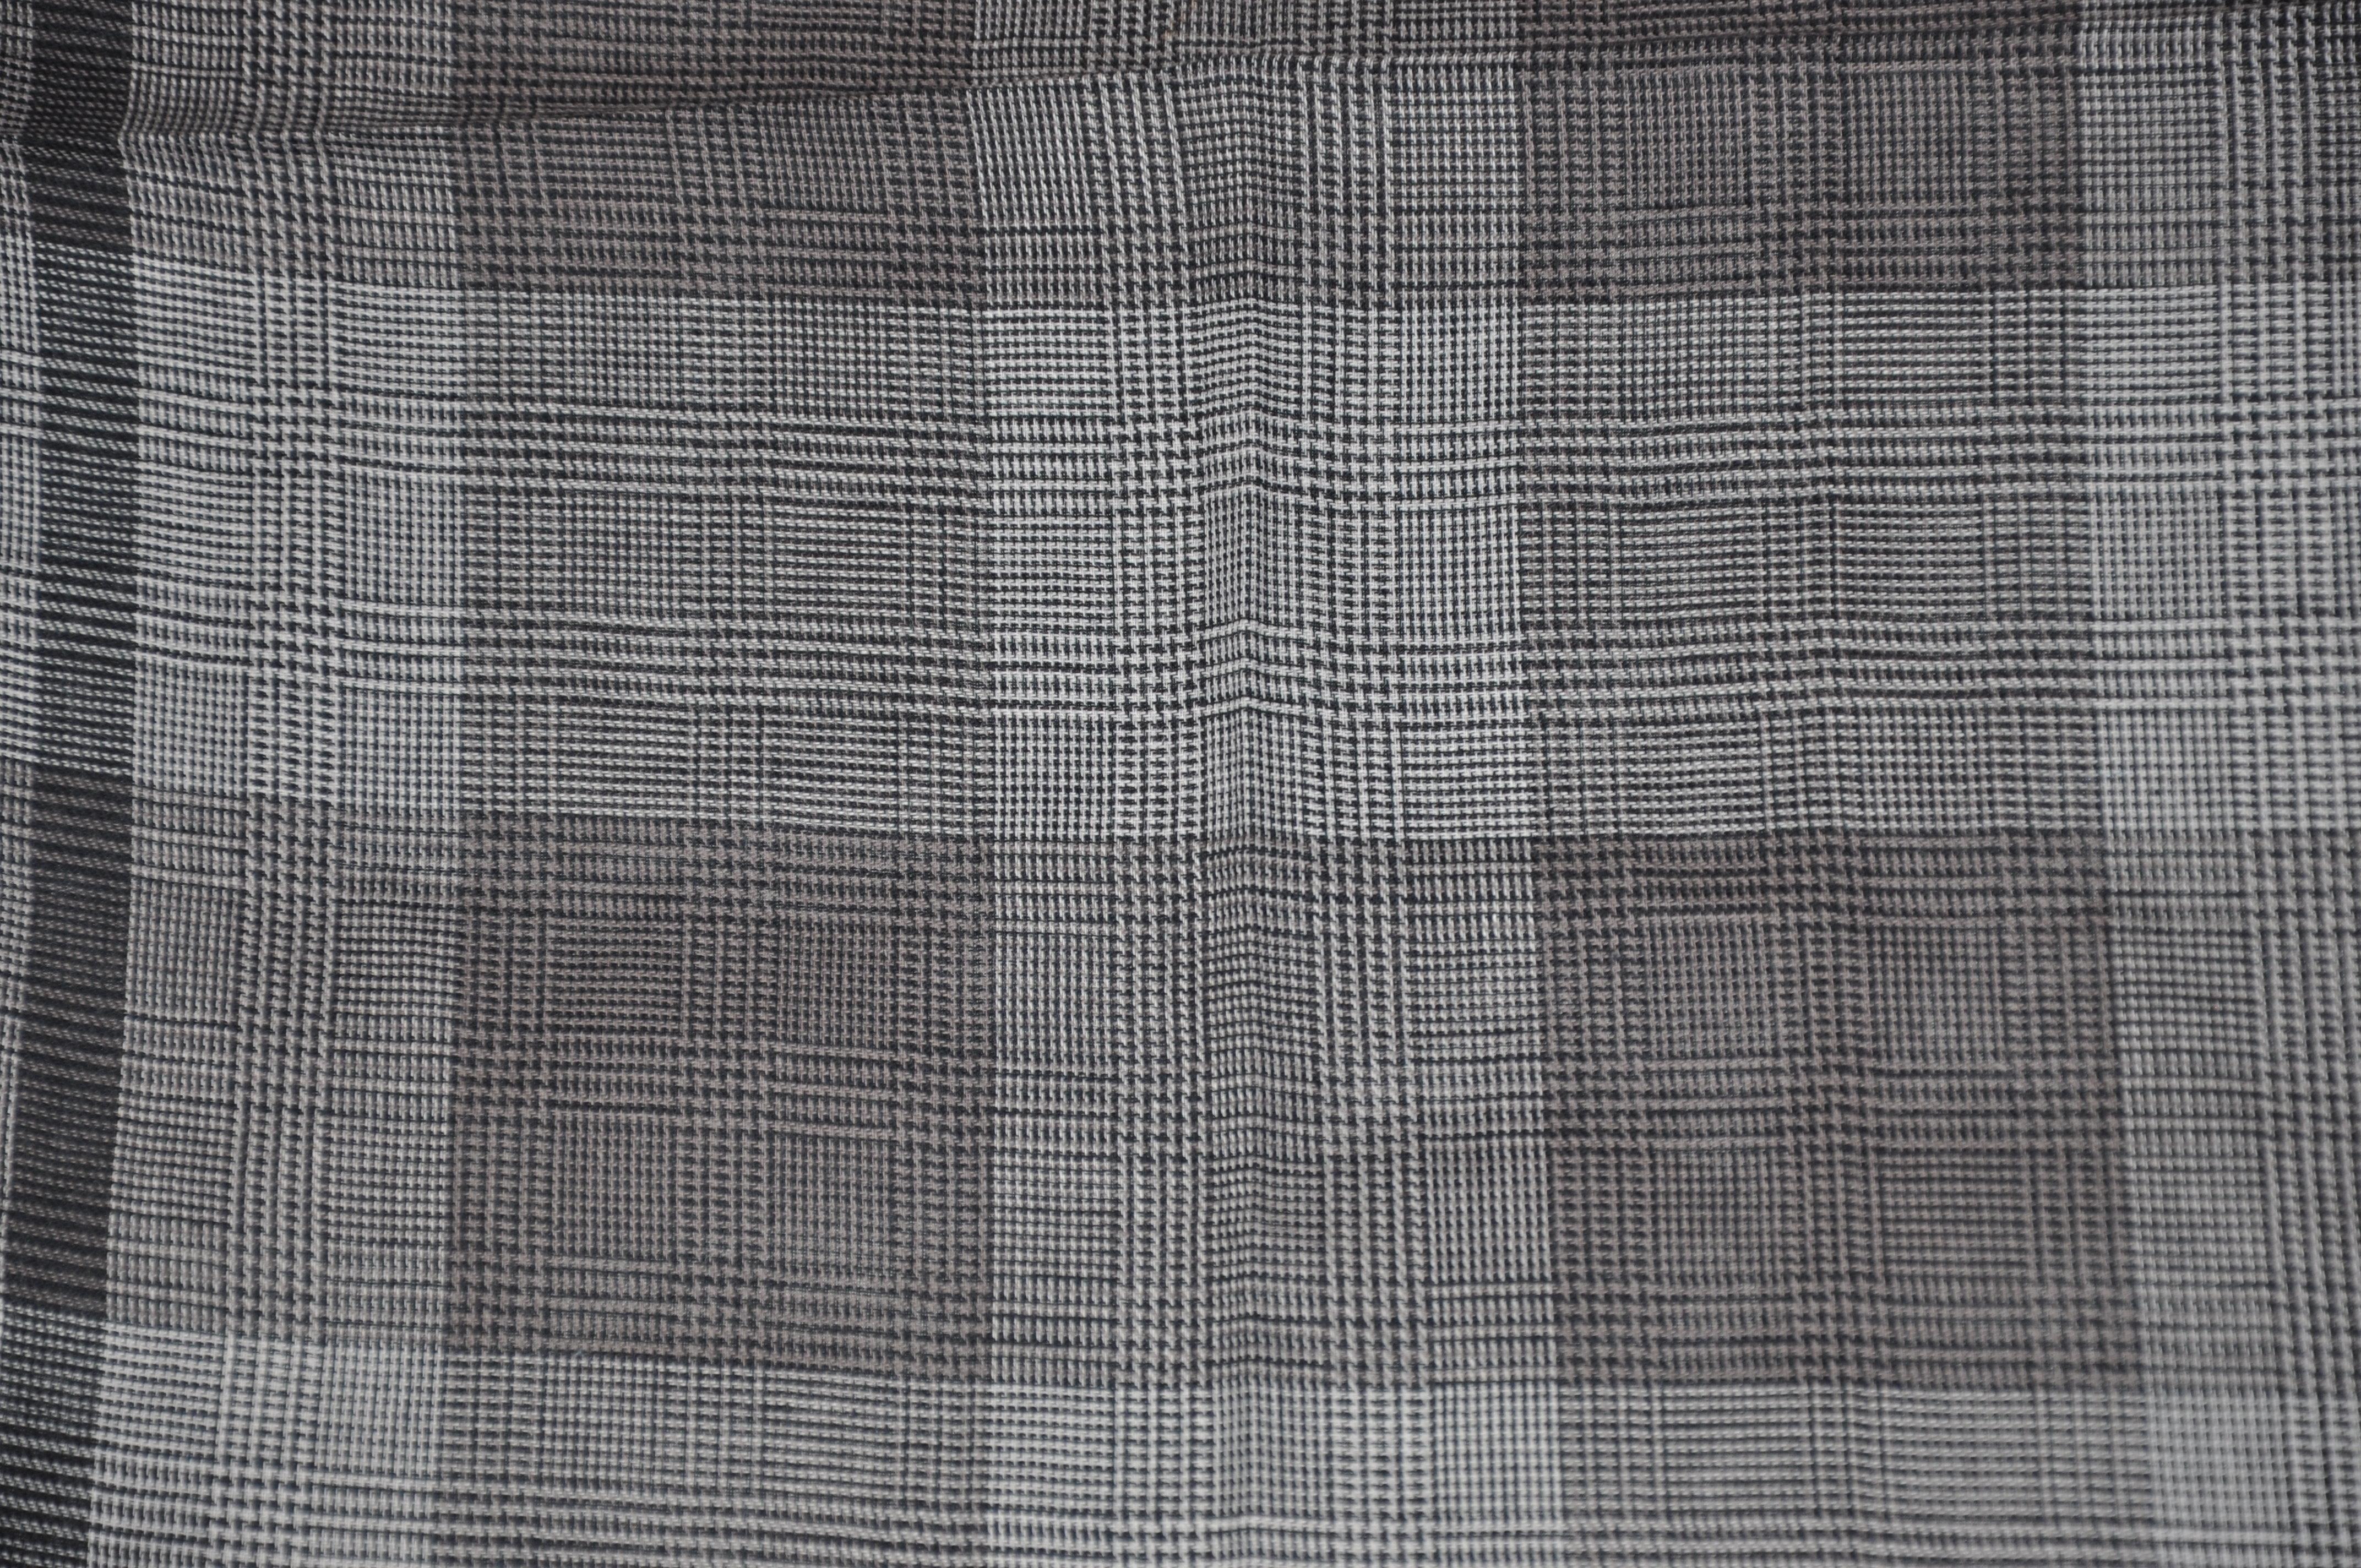 Christian Aujard Shades of Gray Micro Checkered Cotton Handkerchief In Good Condition For Sale In New York, NY